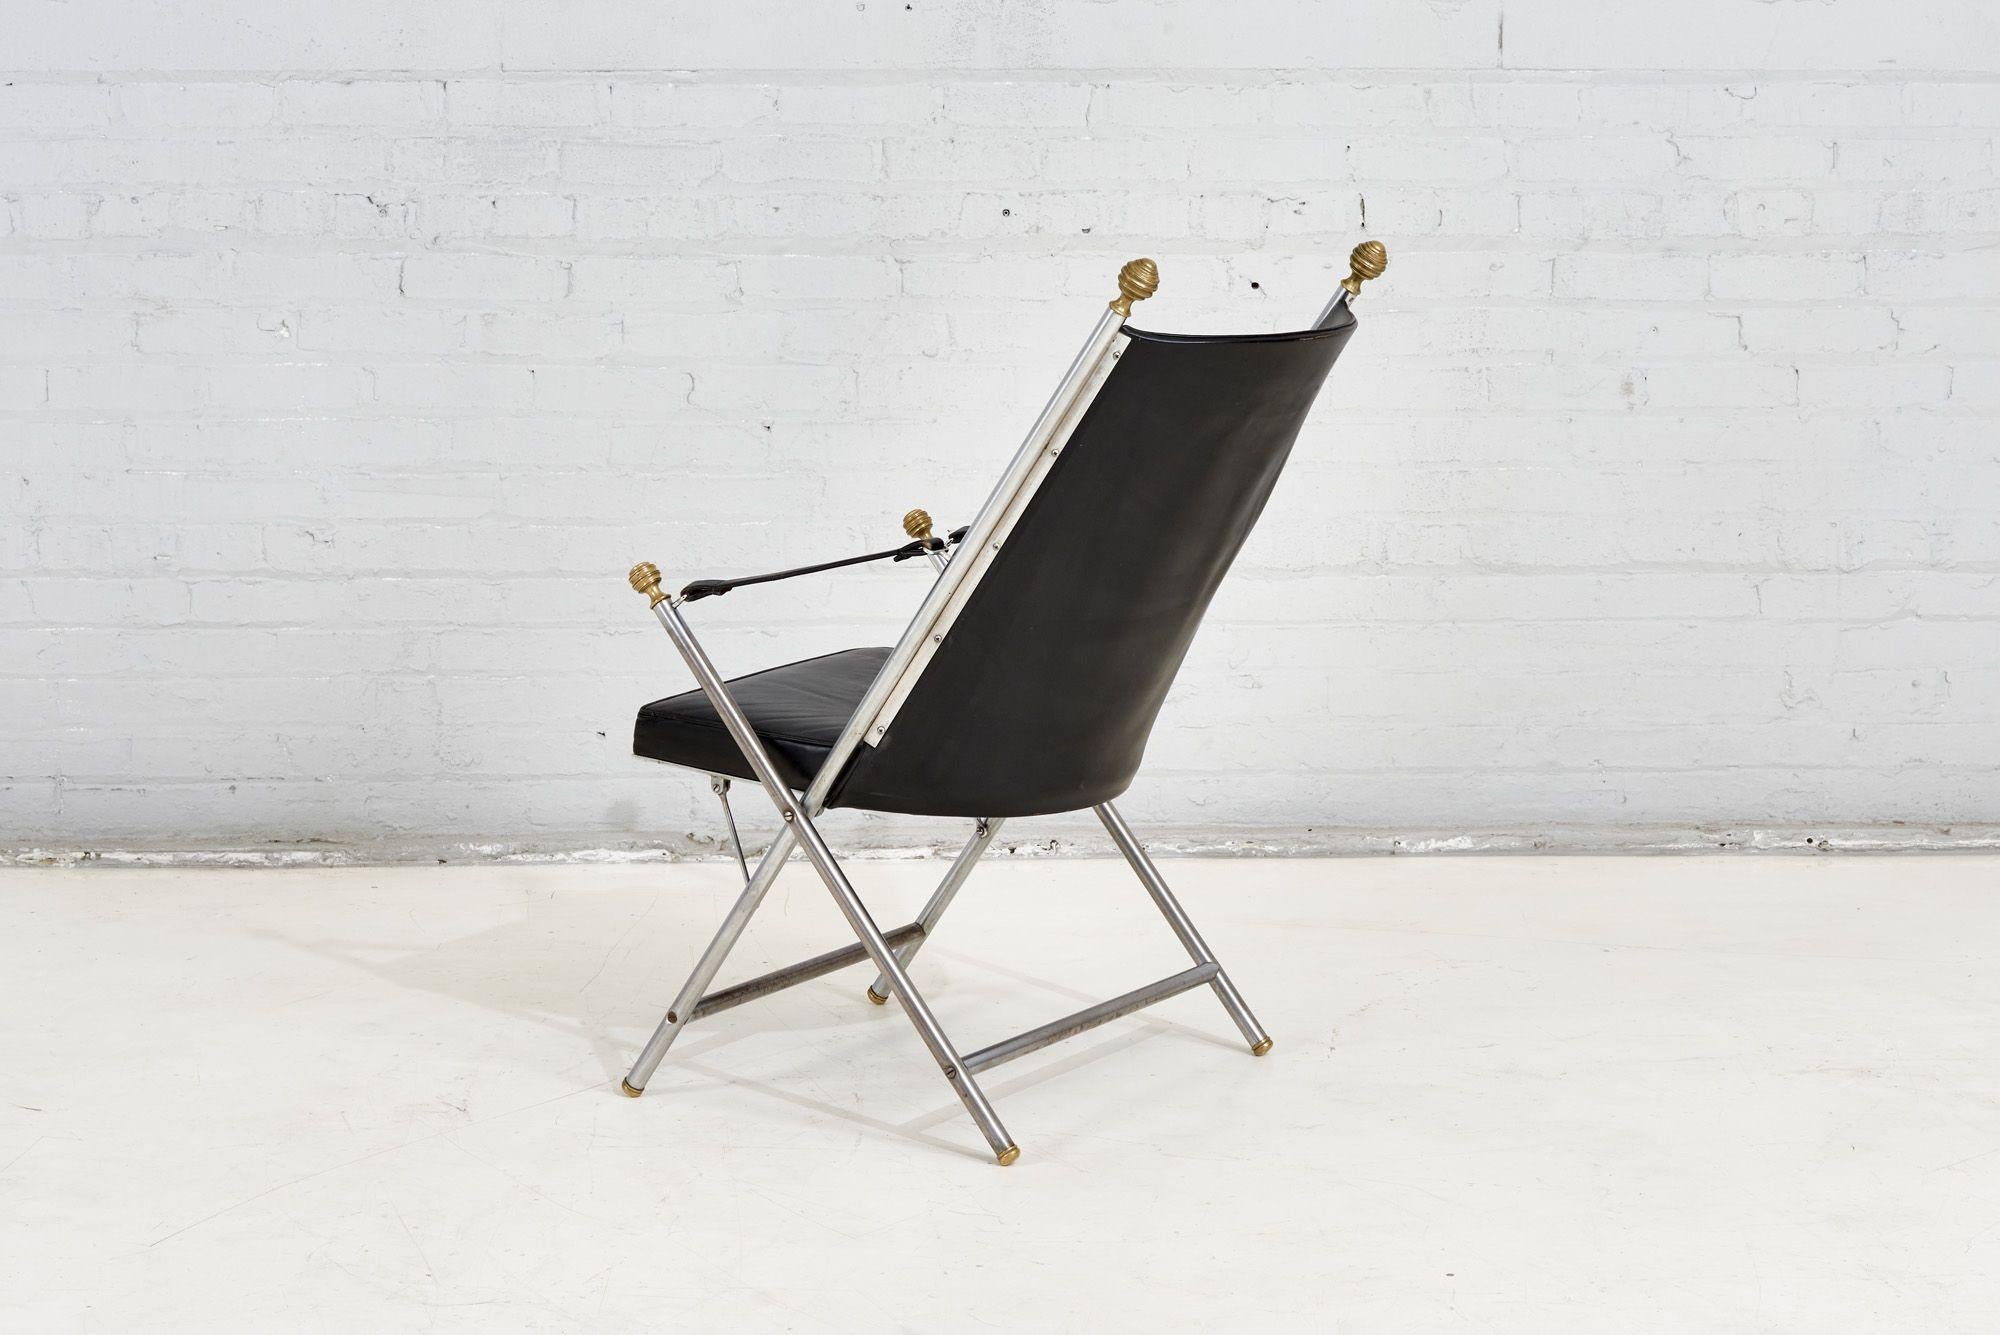 Pair Leather Campaign Folding Chairs by Maison Jansen, 1960 For Sale 2